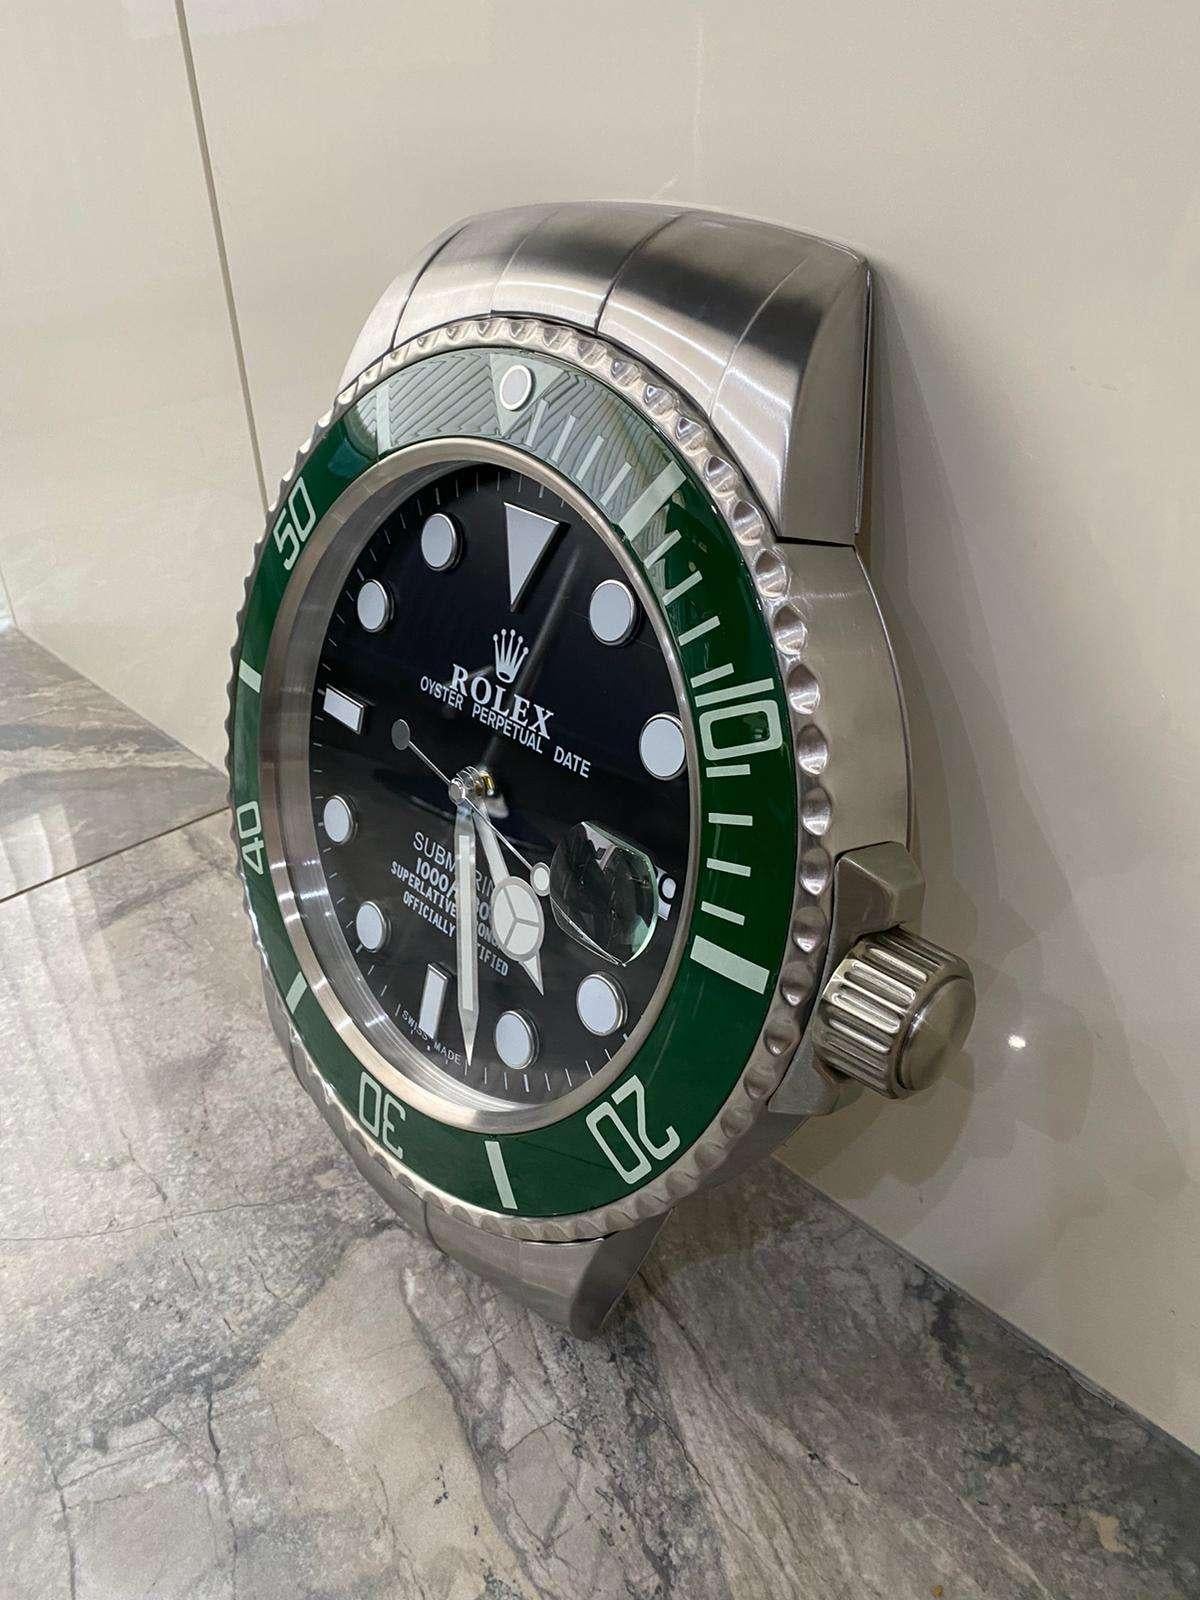 ROLEX Officially Certified Oyster Perpetual Green Submariner Wall Clock, luminous hands, sweeping hands
Free international shipping.